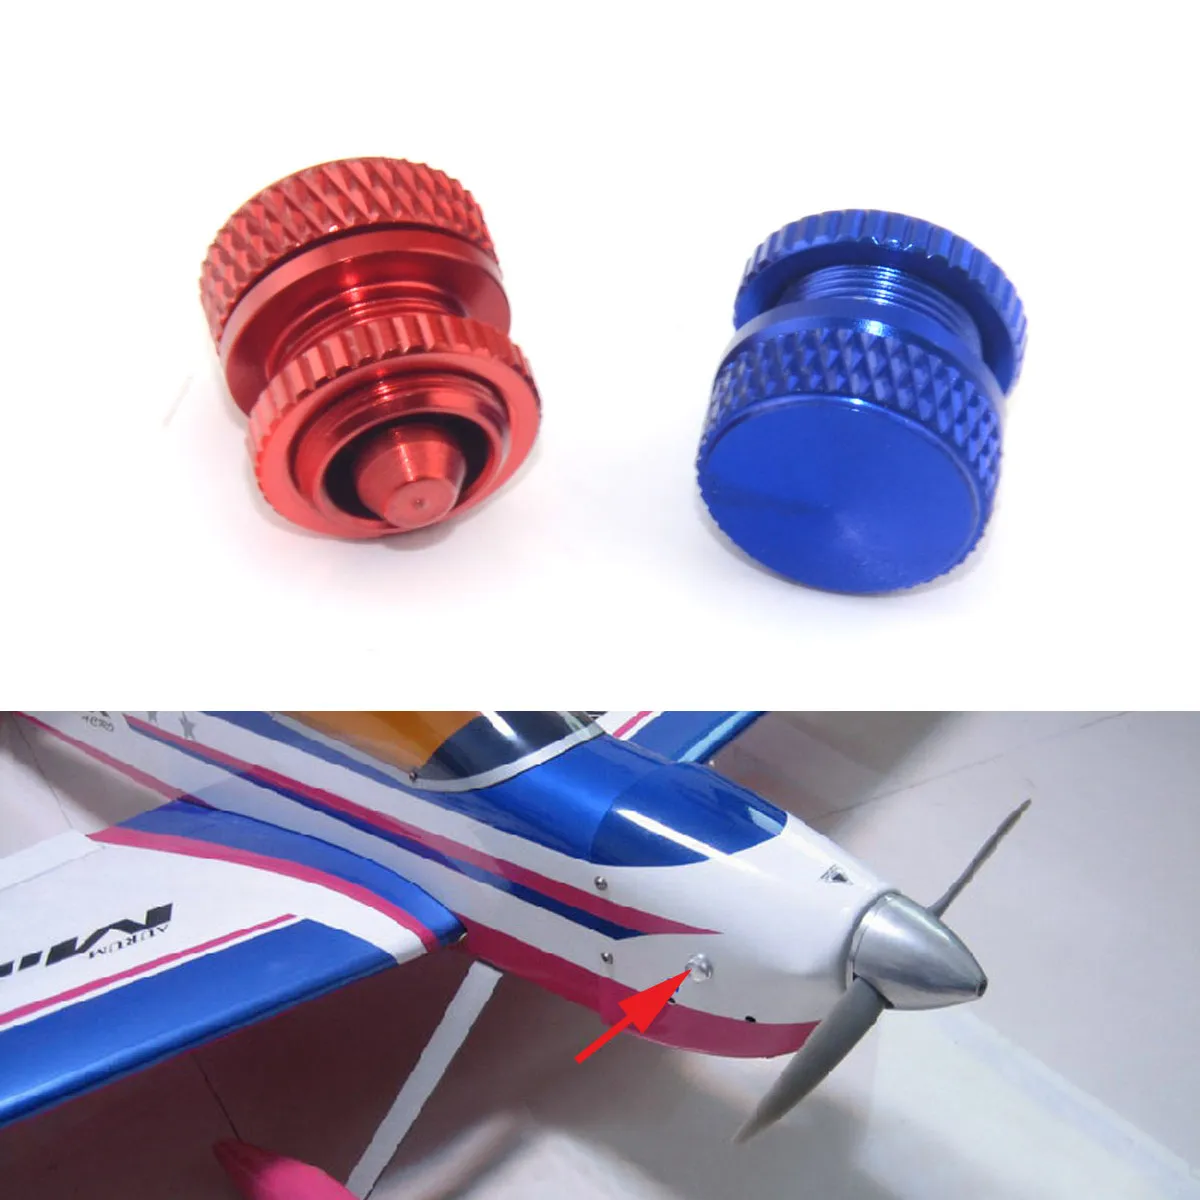 

KUZA CNC Alloy Fuel Filler Dot Plug Pipe Port for RC Aircraft Smoking System Fuel Gas Airplane Boat